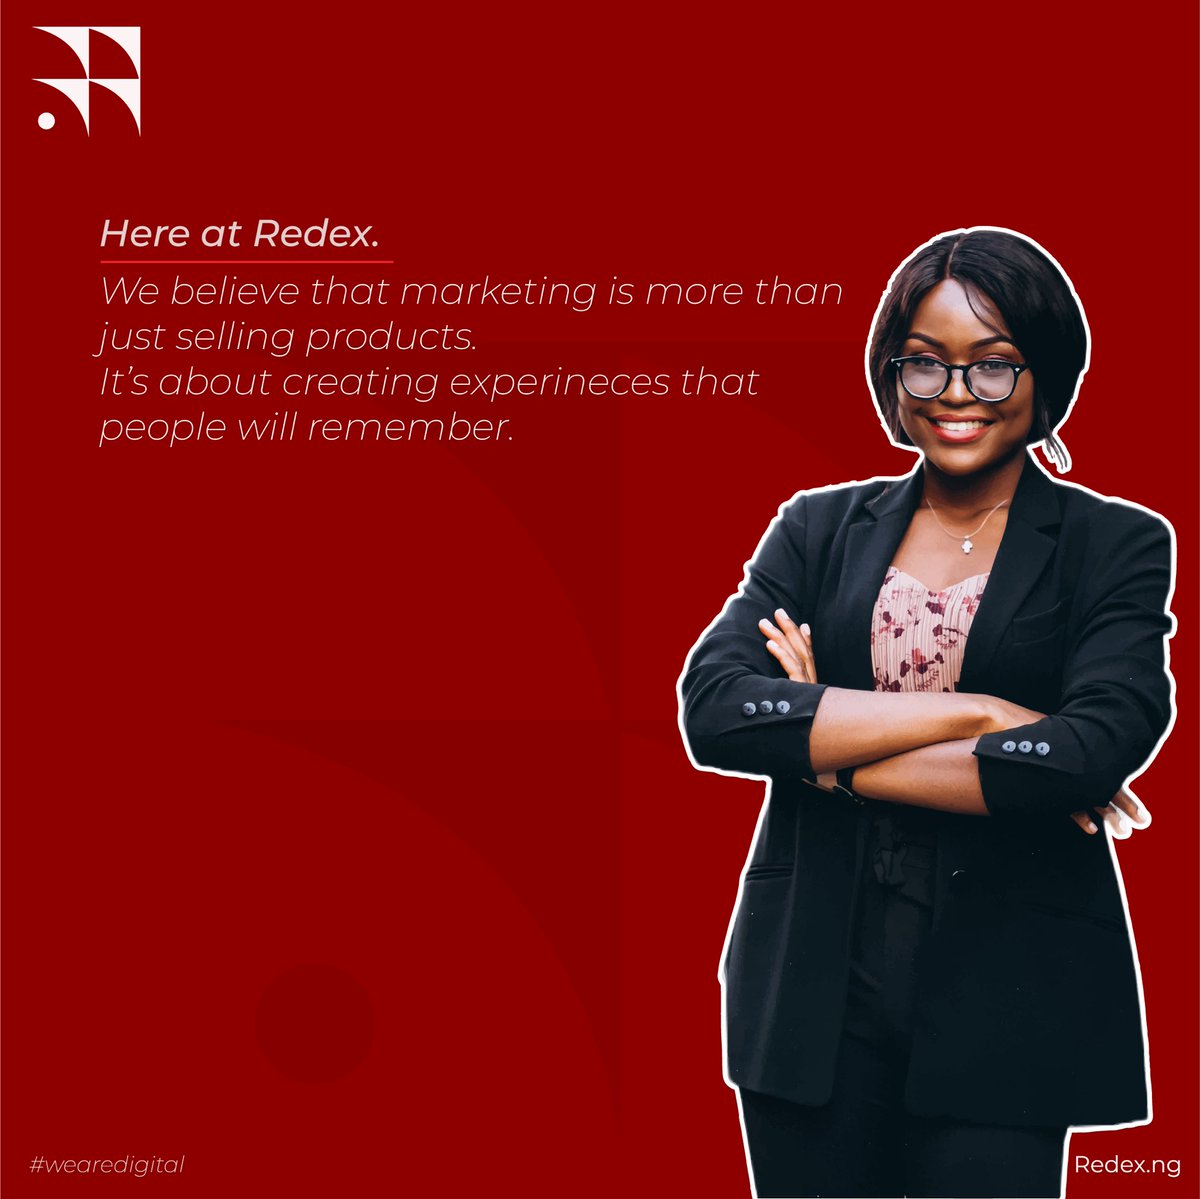 Join us at Redex, where we believe that marketing is not just about selling products, but crafting unforgettable experiences that linger in people's minds

#wearedigital #redex #marketing #branding #digitalmarketing